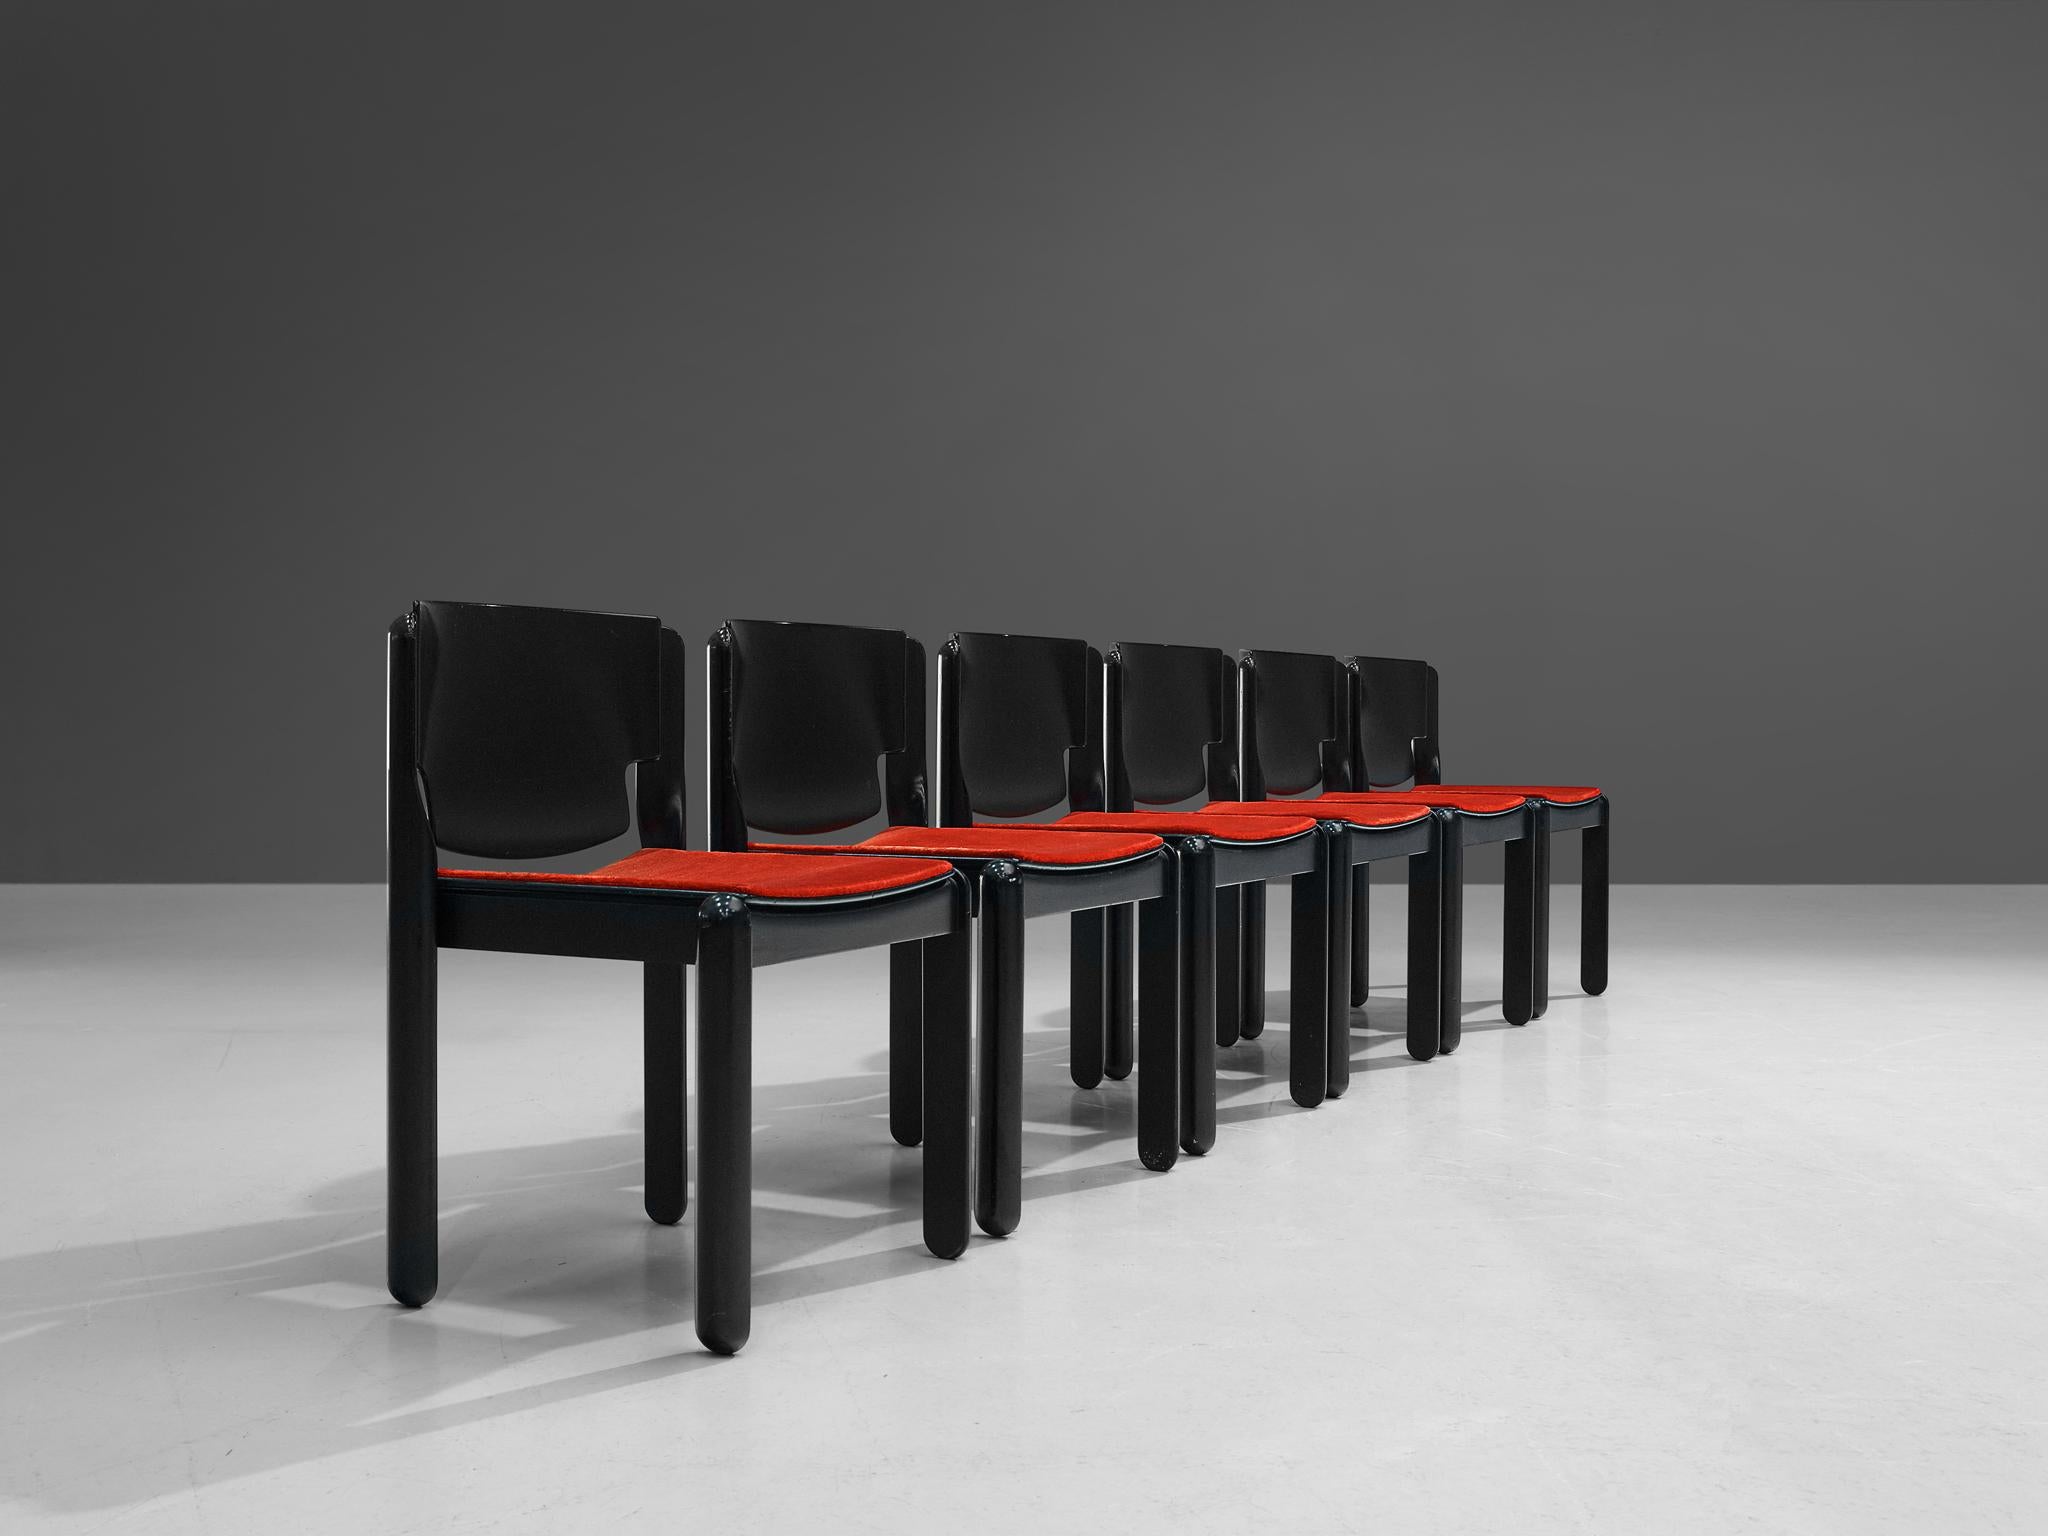 Vico Magistretti for Cassina, set of six chairs model '122', curved plywood, red velvet, Italy, 1967

This Italian set features a remarkable sculpted back that is beautifully curved on both sides, resulting in an expansion at the bottom. The half